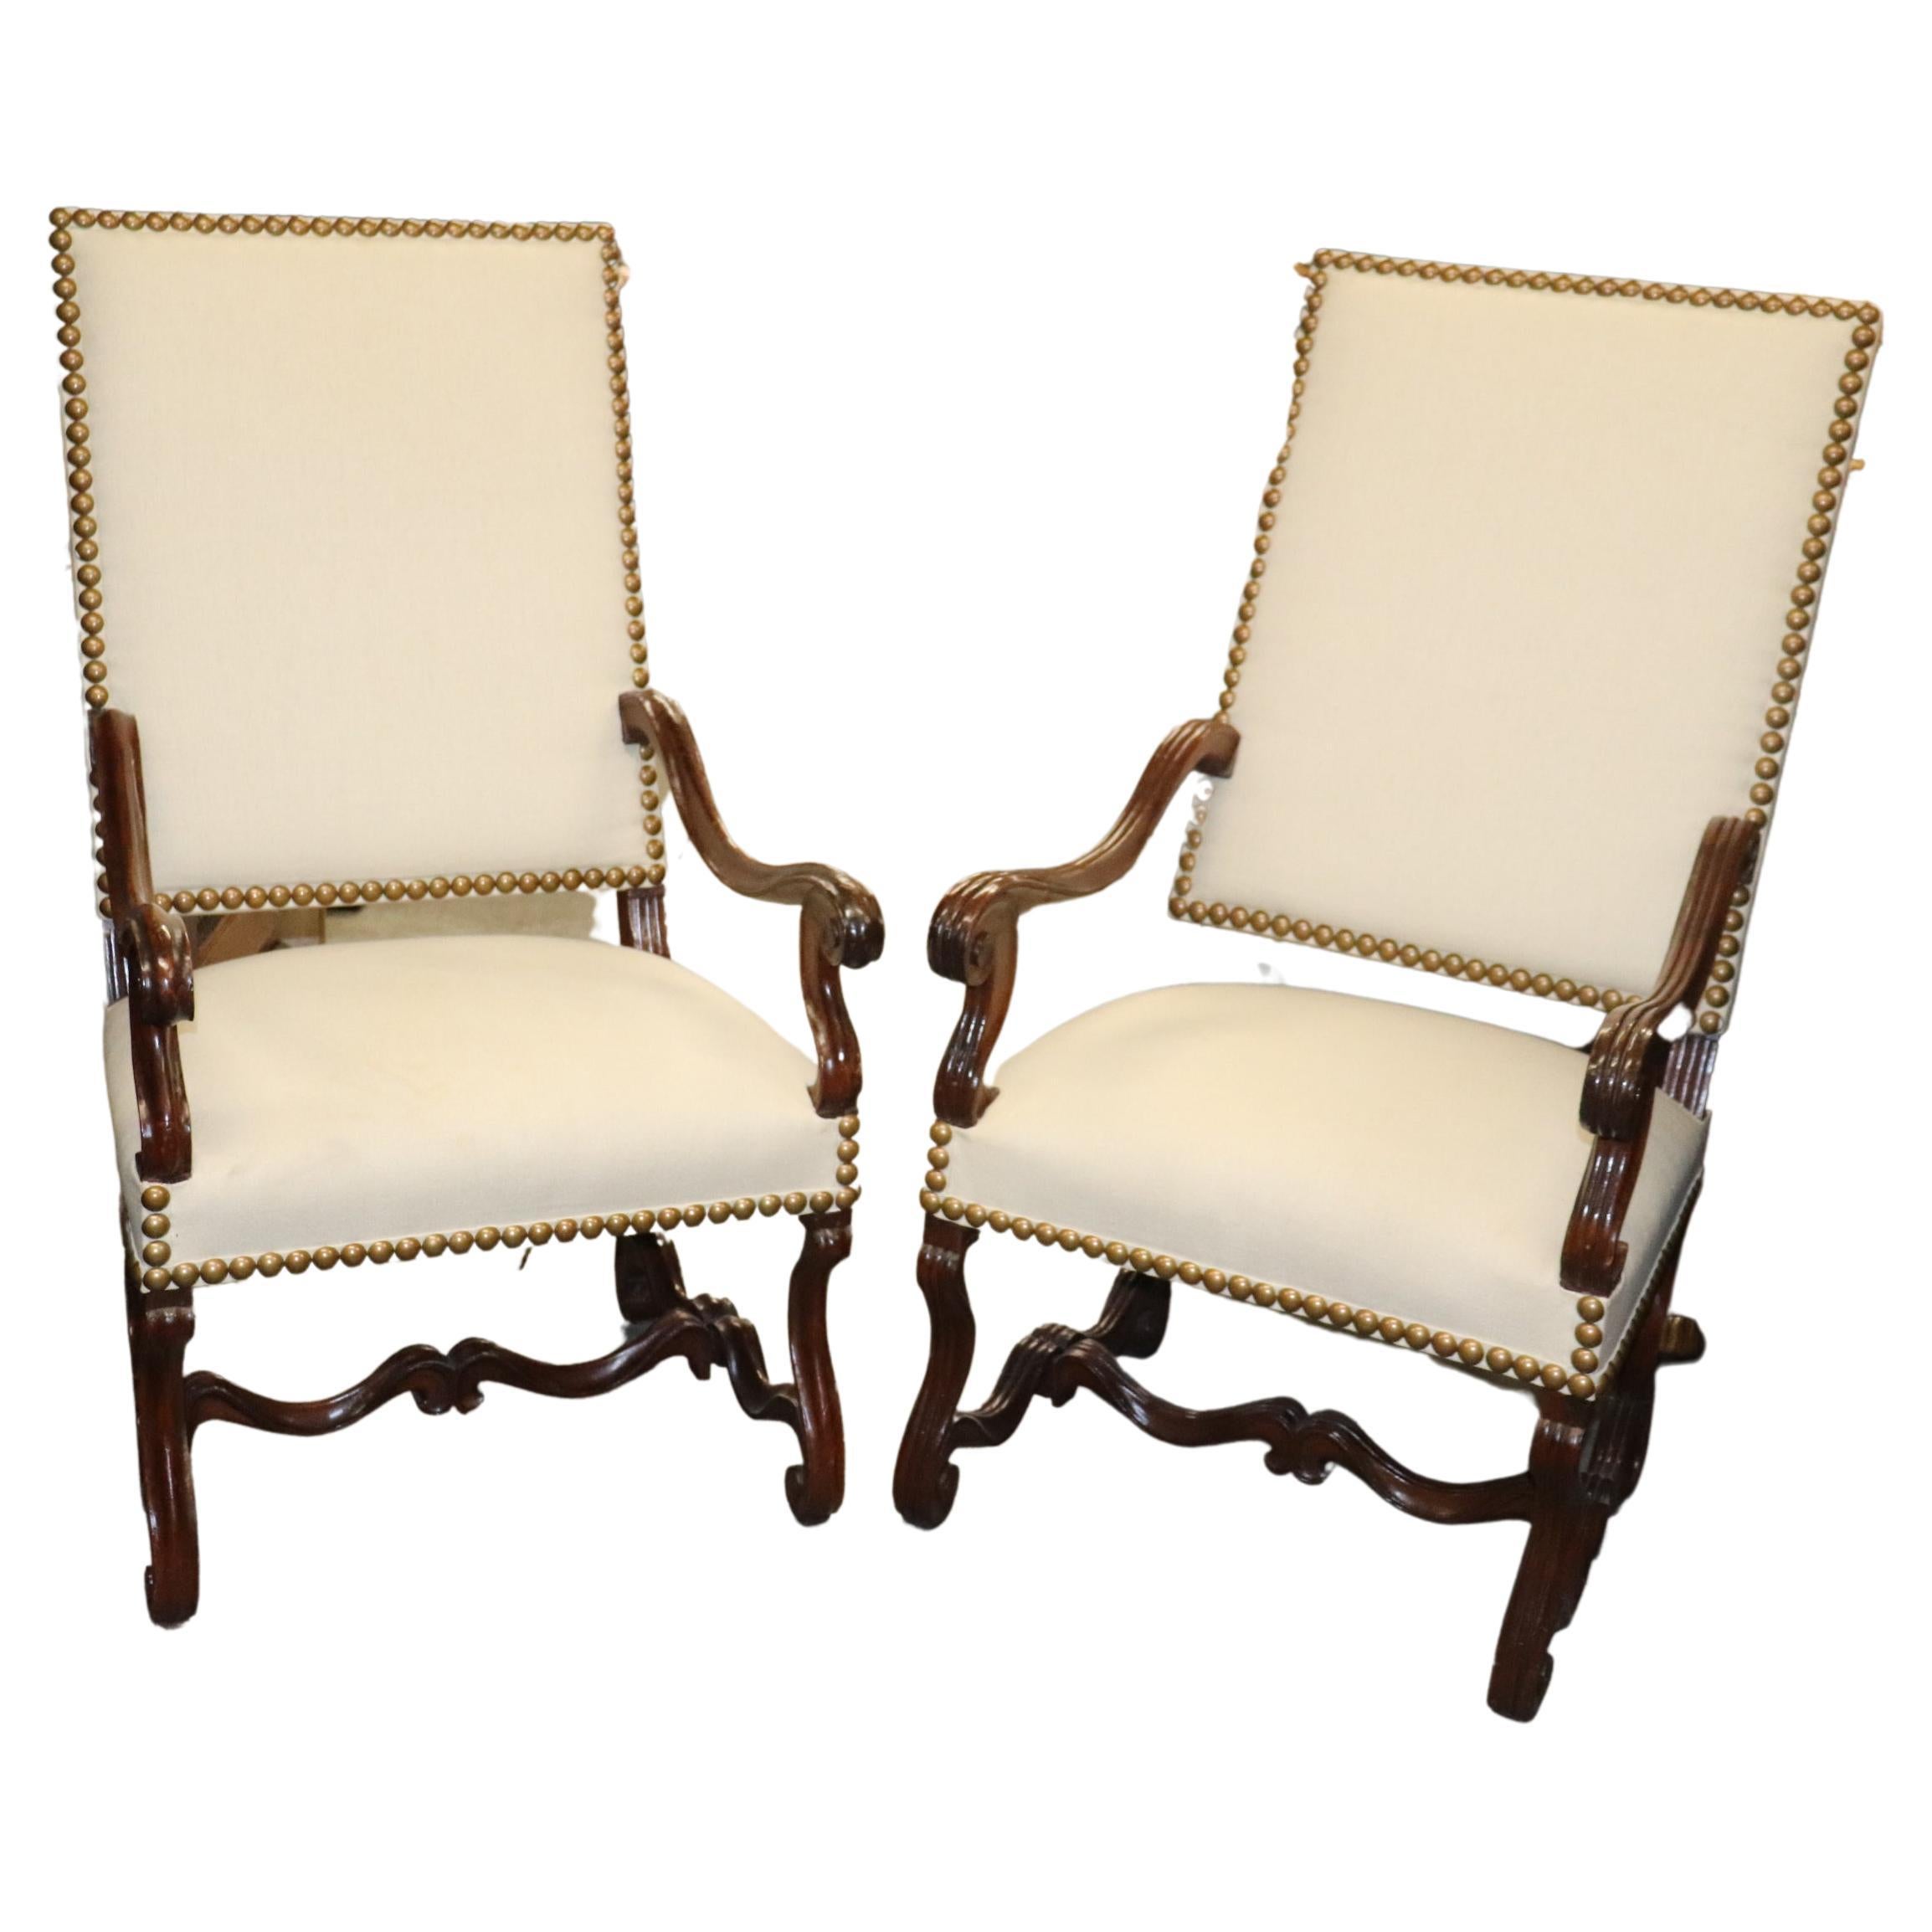 Companion Near Matched Pair of Brass Studded French Mutton Leg Armchairs